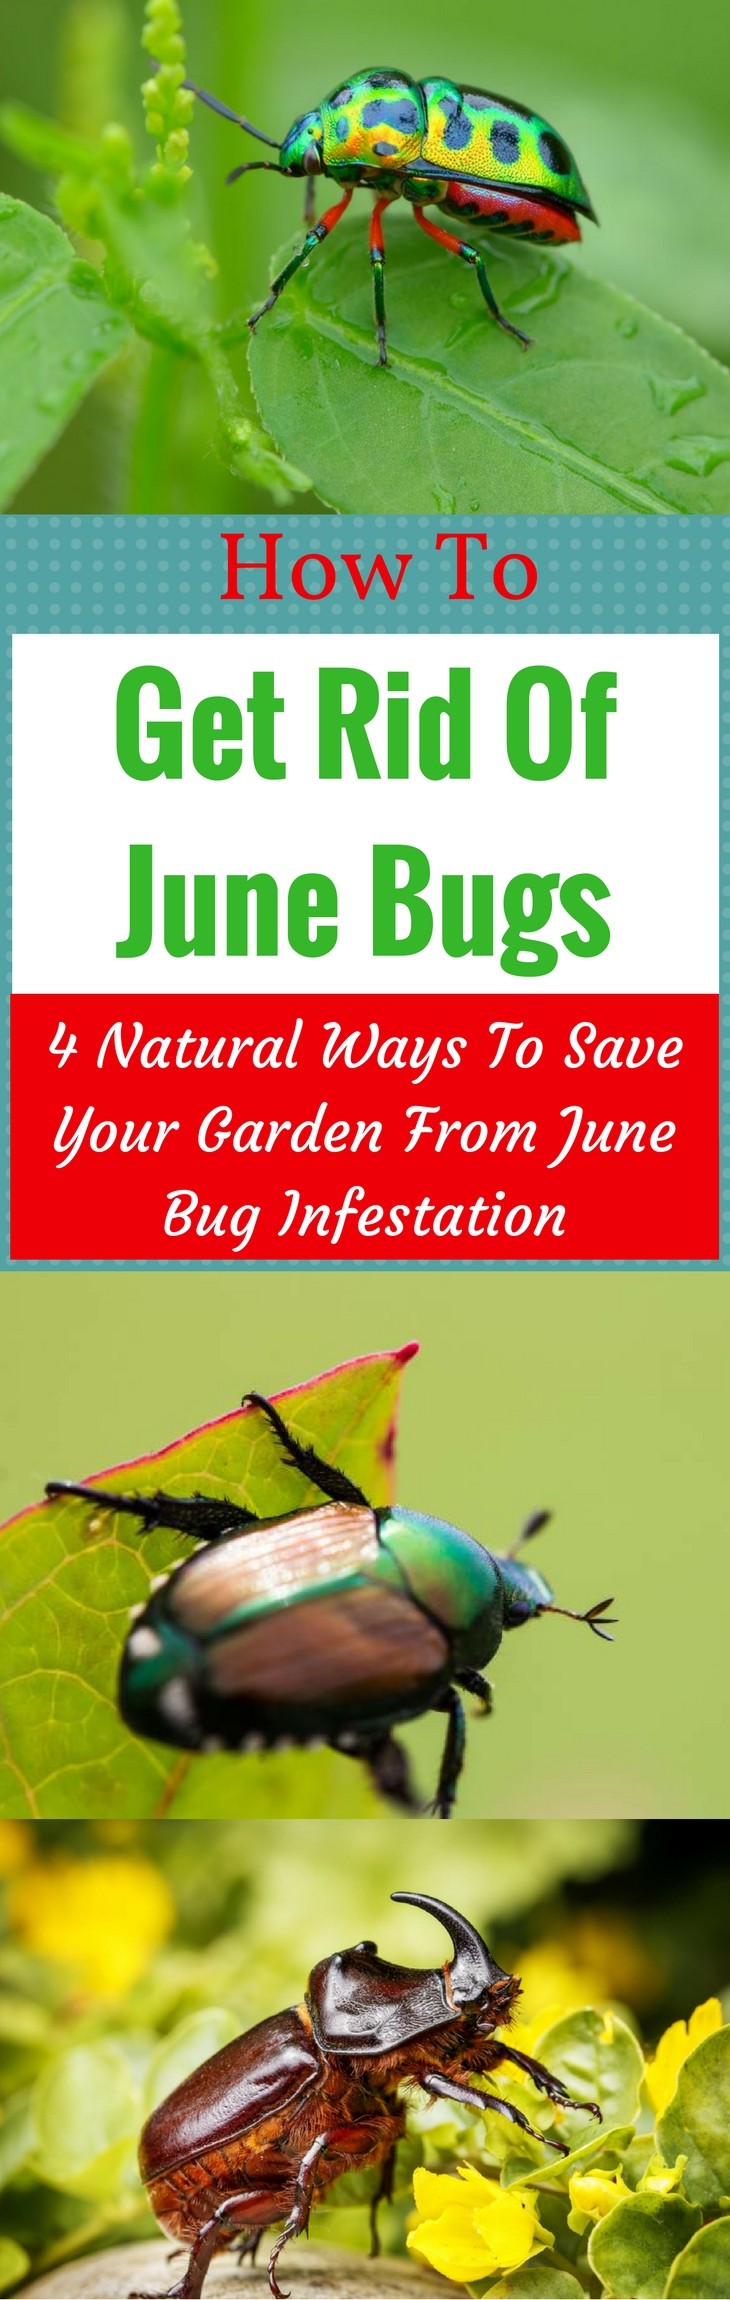 How To Get Rid Of June Bugs